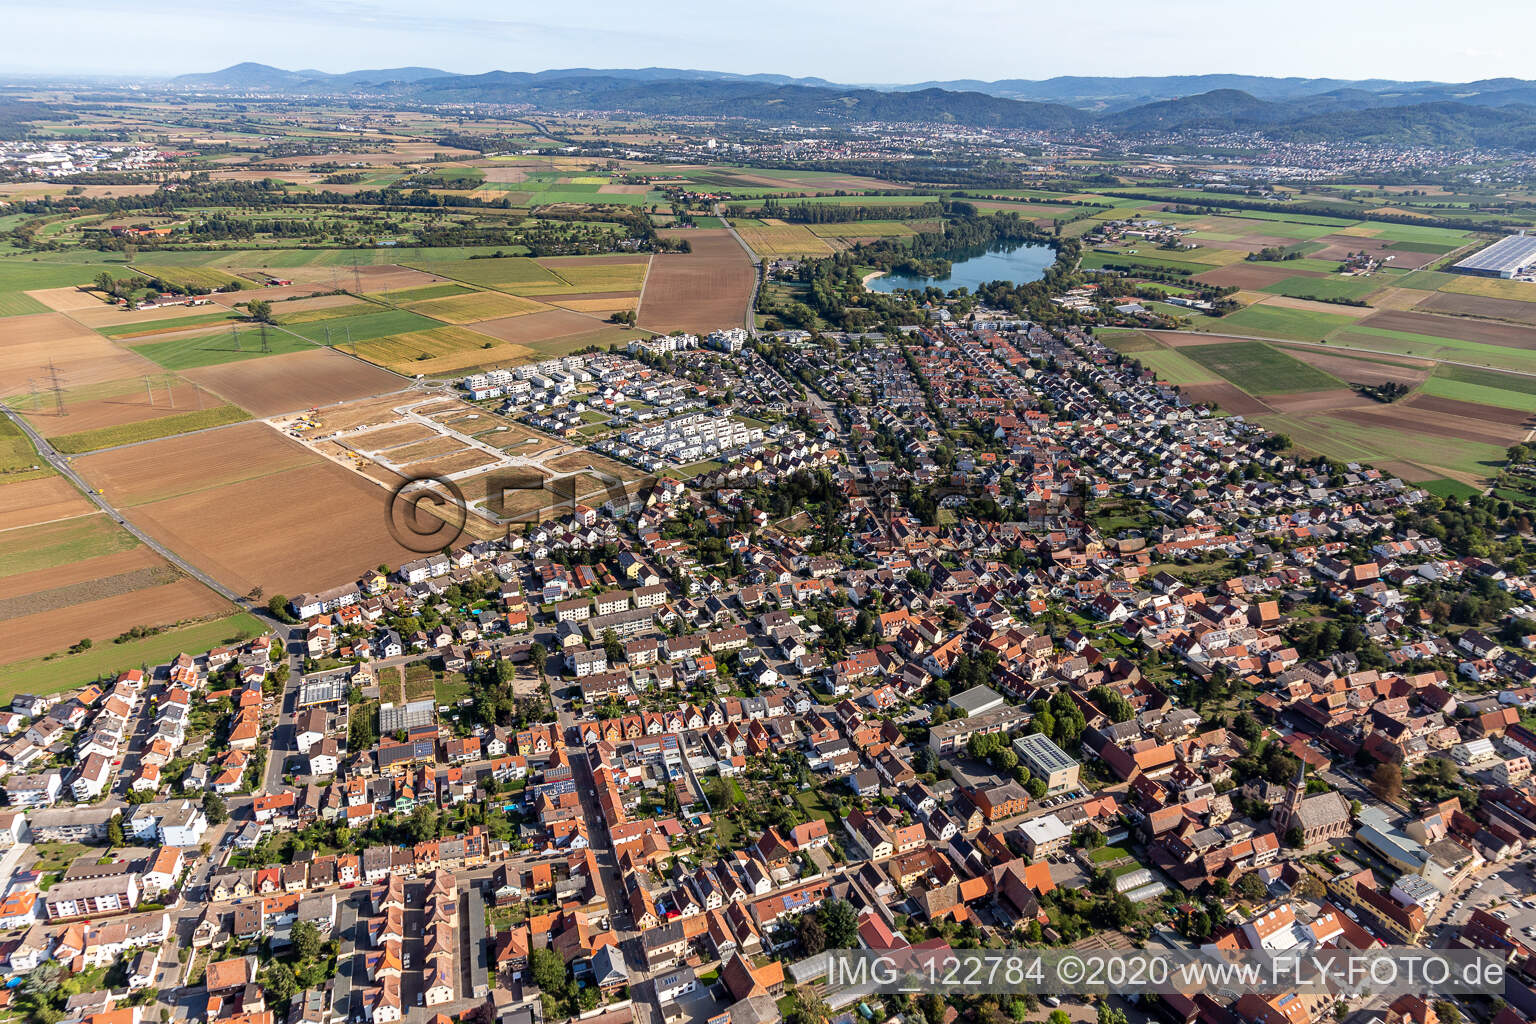 Heddesheim in the state Baden-Wuerttemberg, Germany seen from a drone